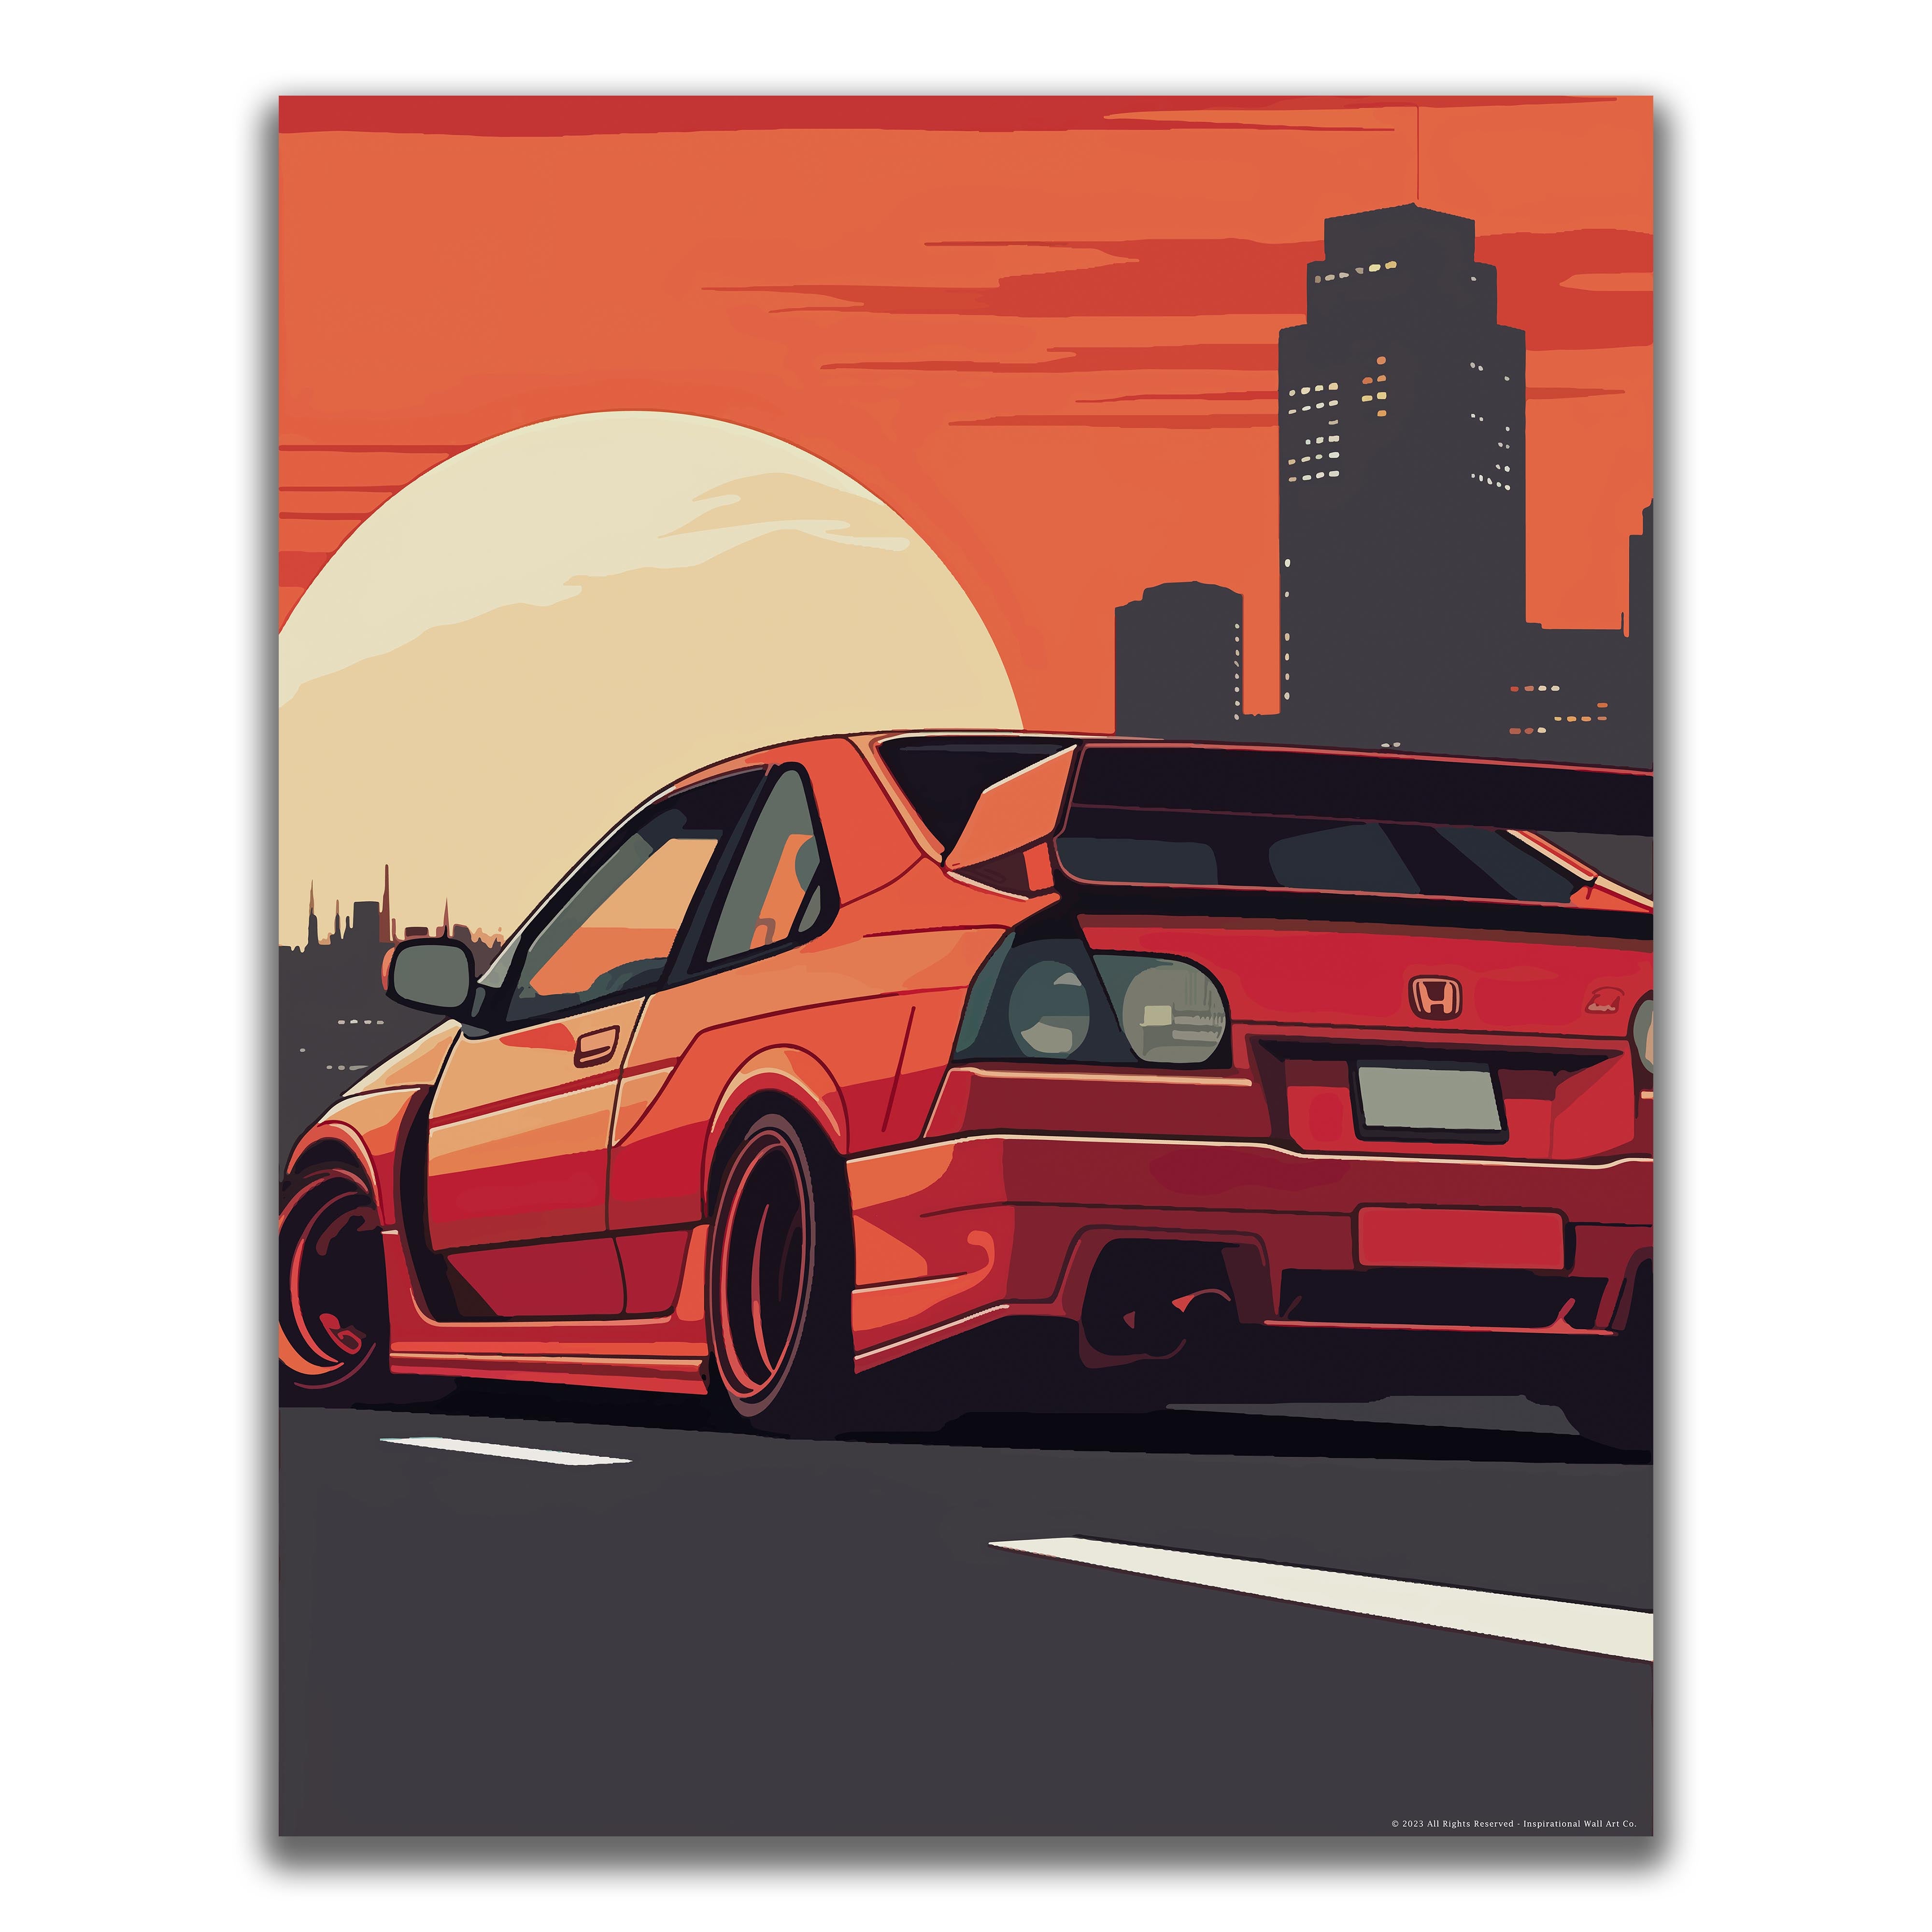 The Art of Speed - Car Poster